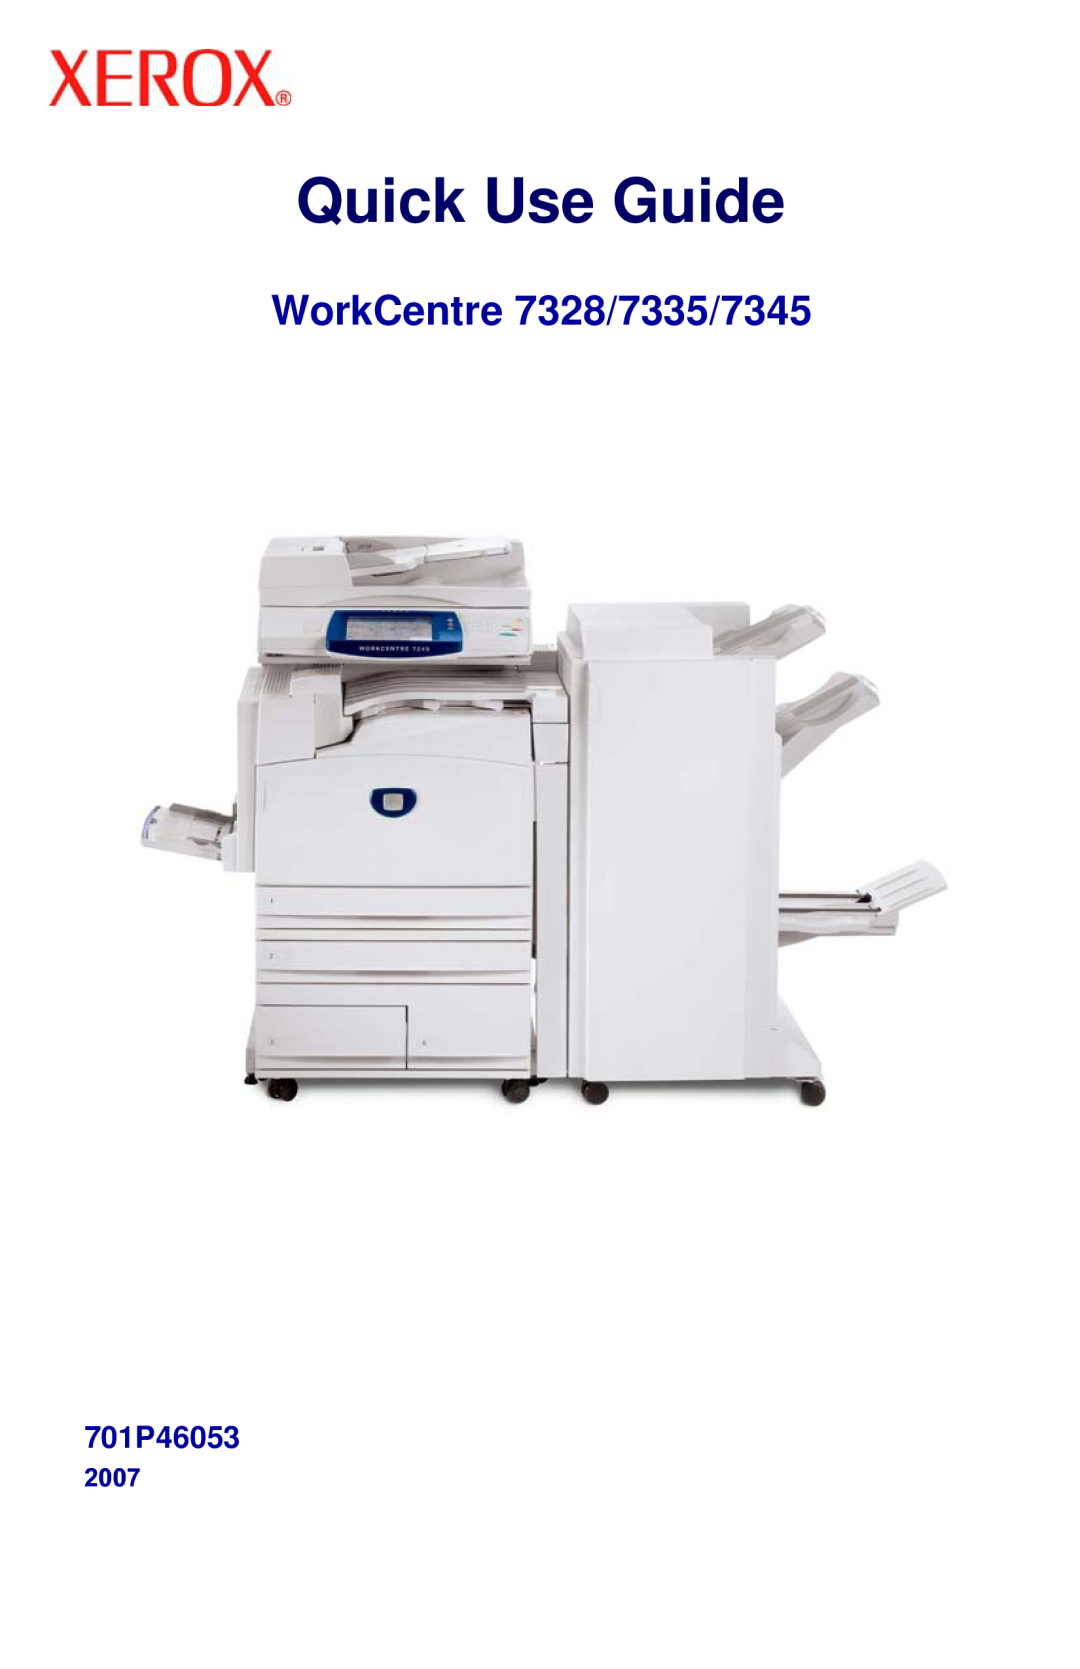 Xerox manual Quick Use Guide, WorkCentre 7328/7335/7345, 701P46053 